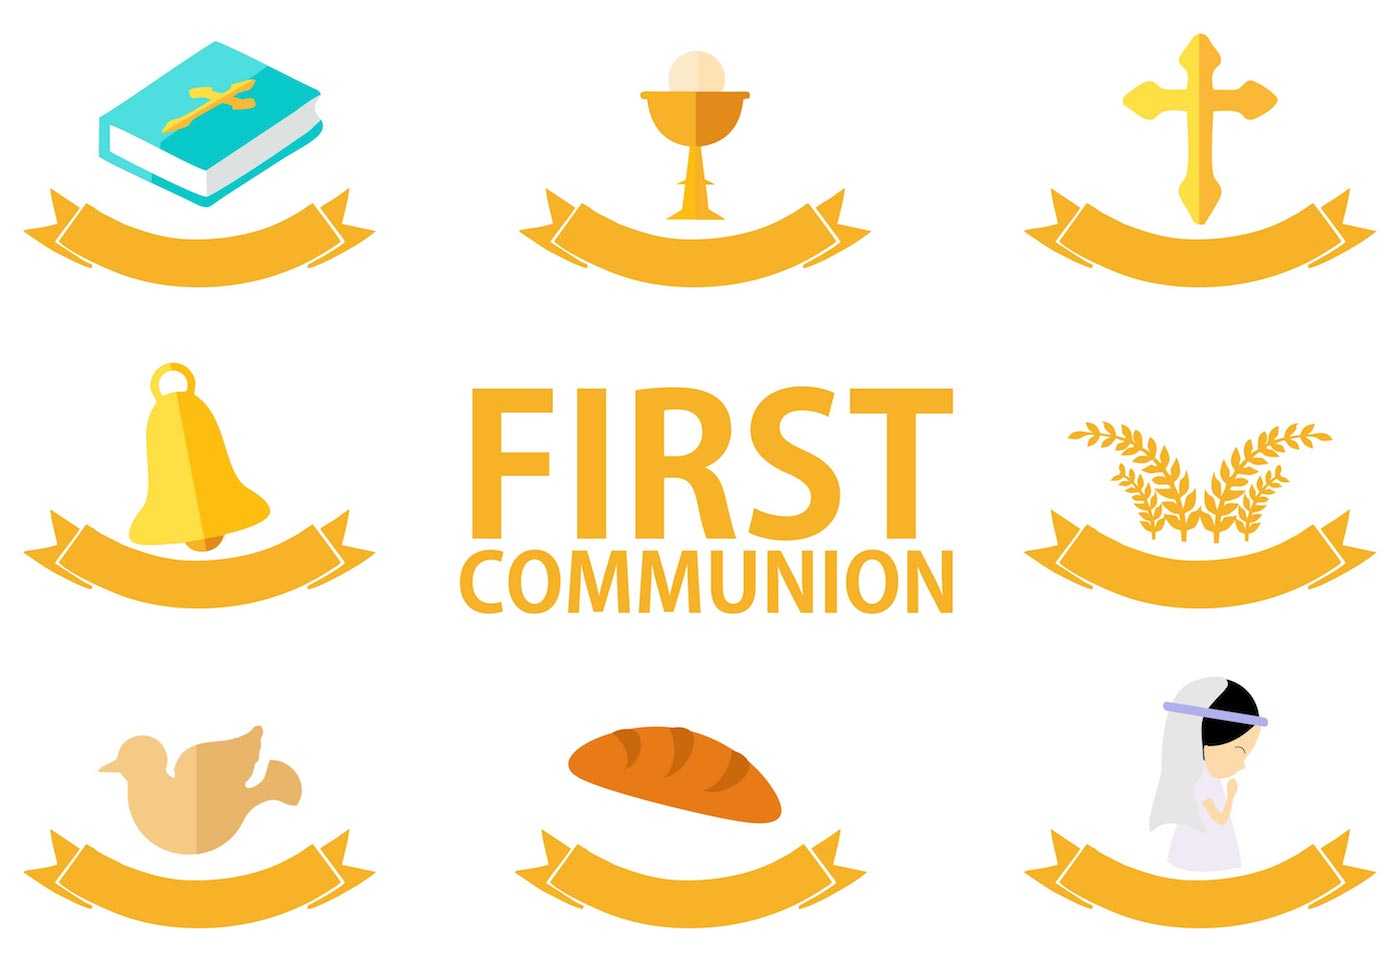 First Communion Template Free Vector Art – (25 Free Downloads) Within First Communion Banner Templates